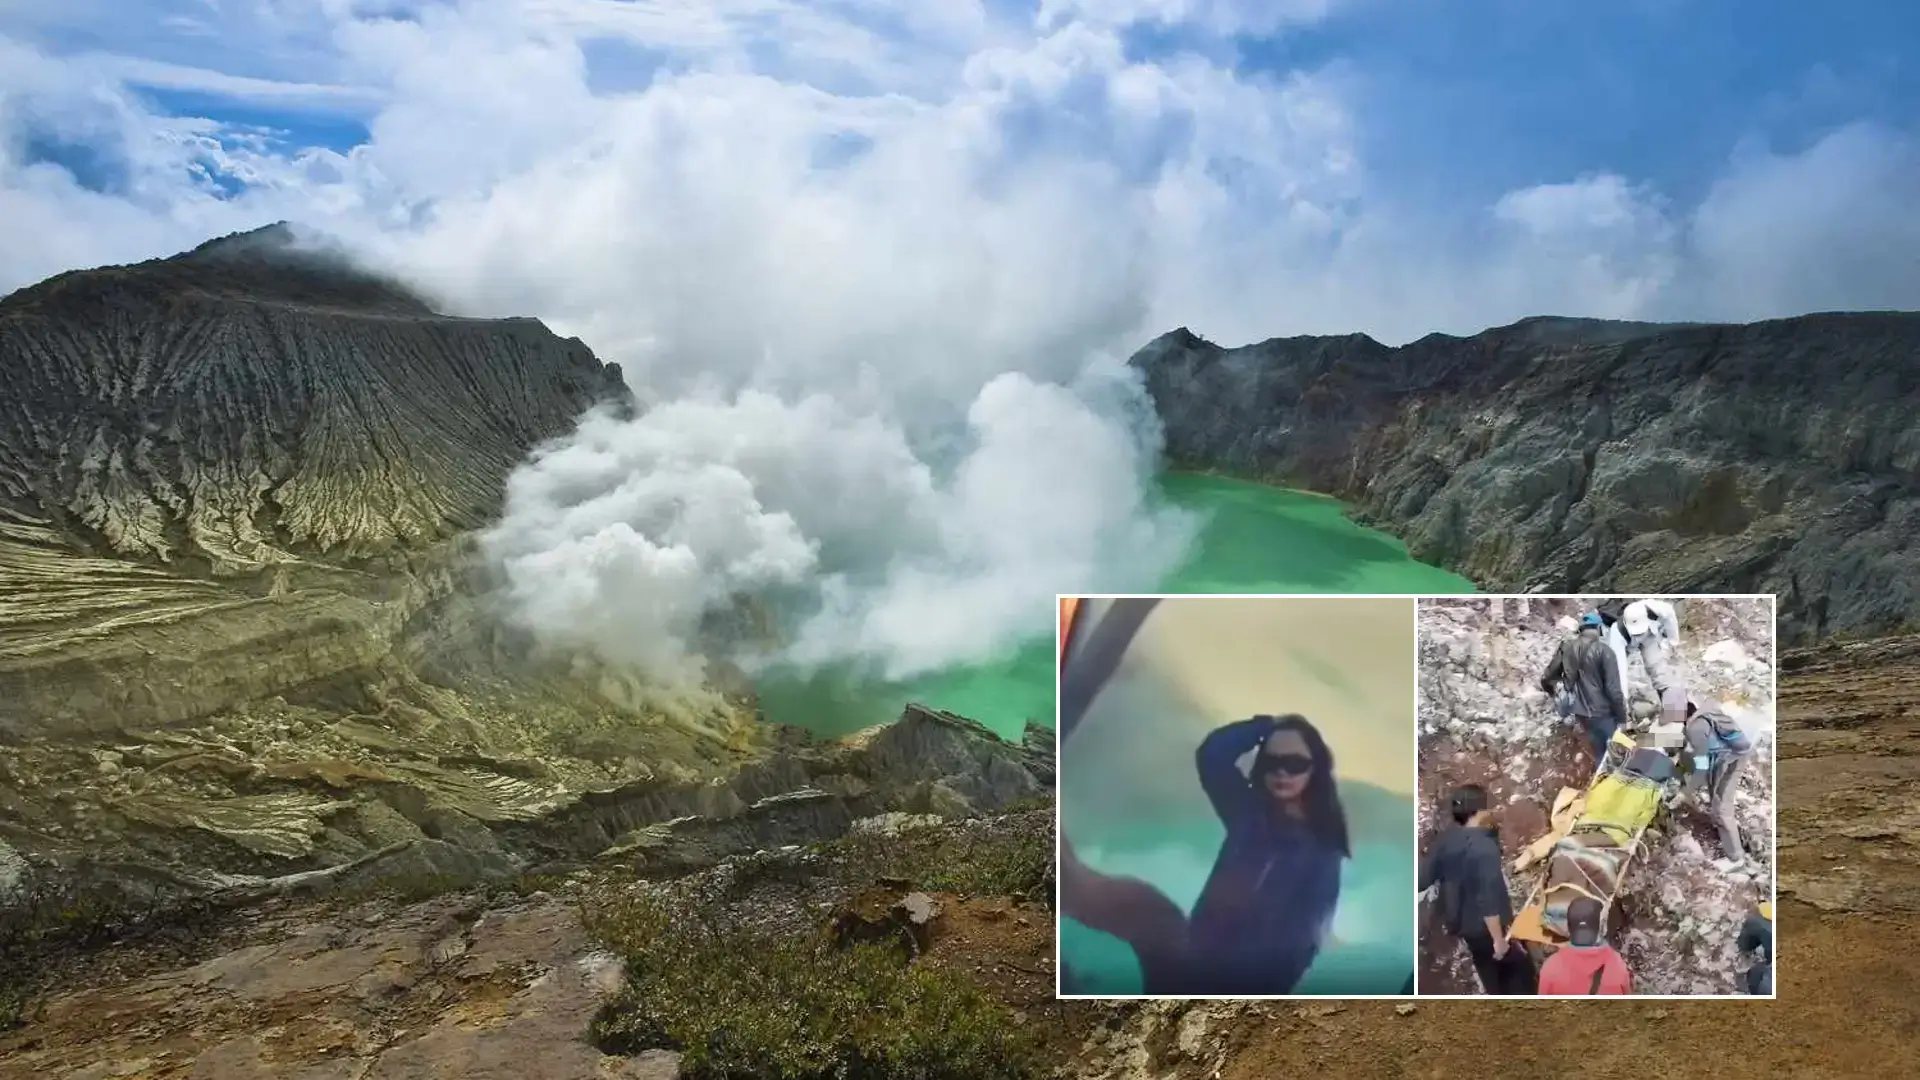 Tourist Dies After Falling Into Active Volcano While Taking Photos